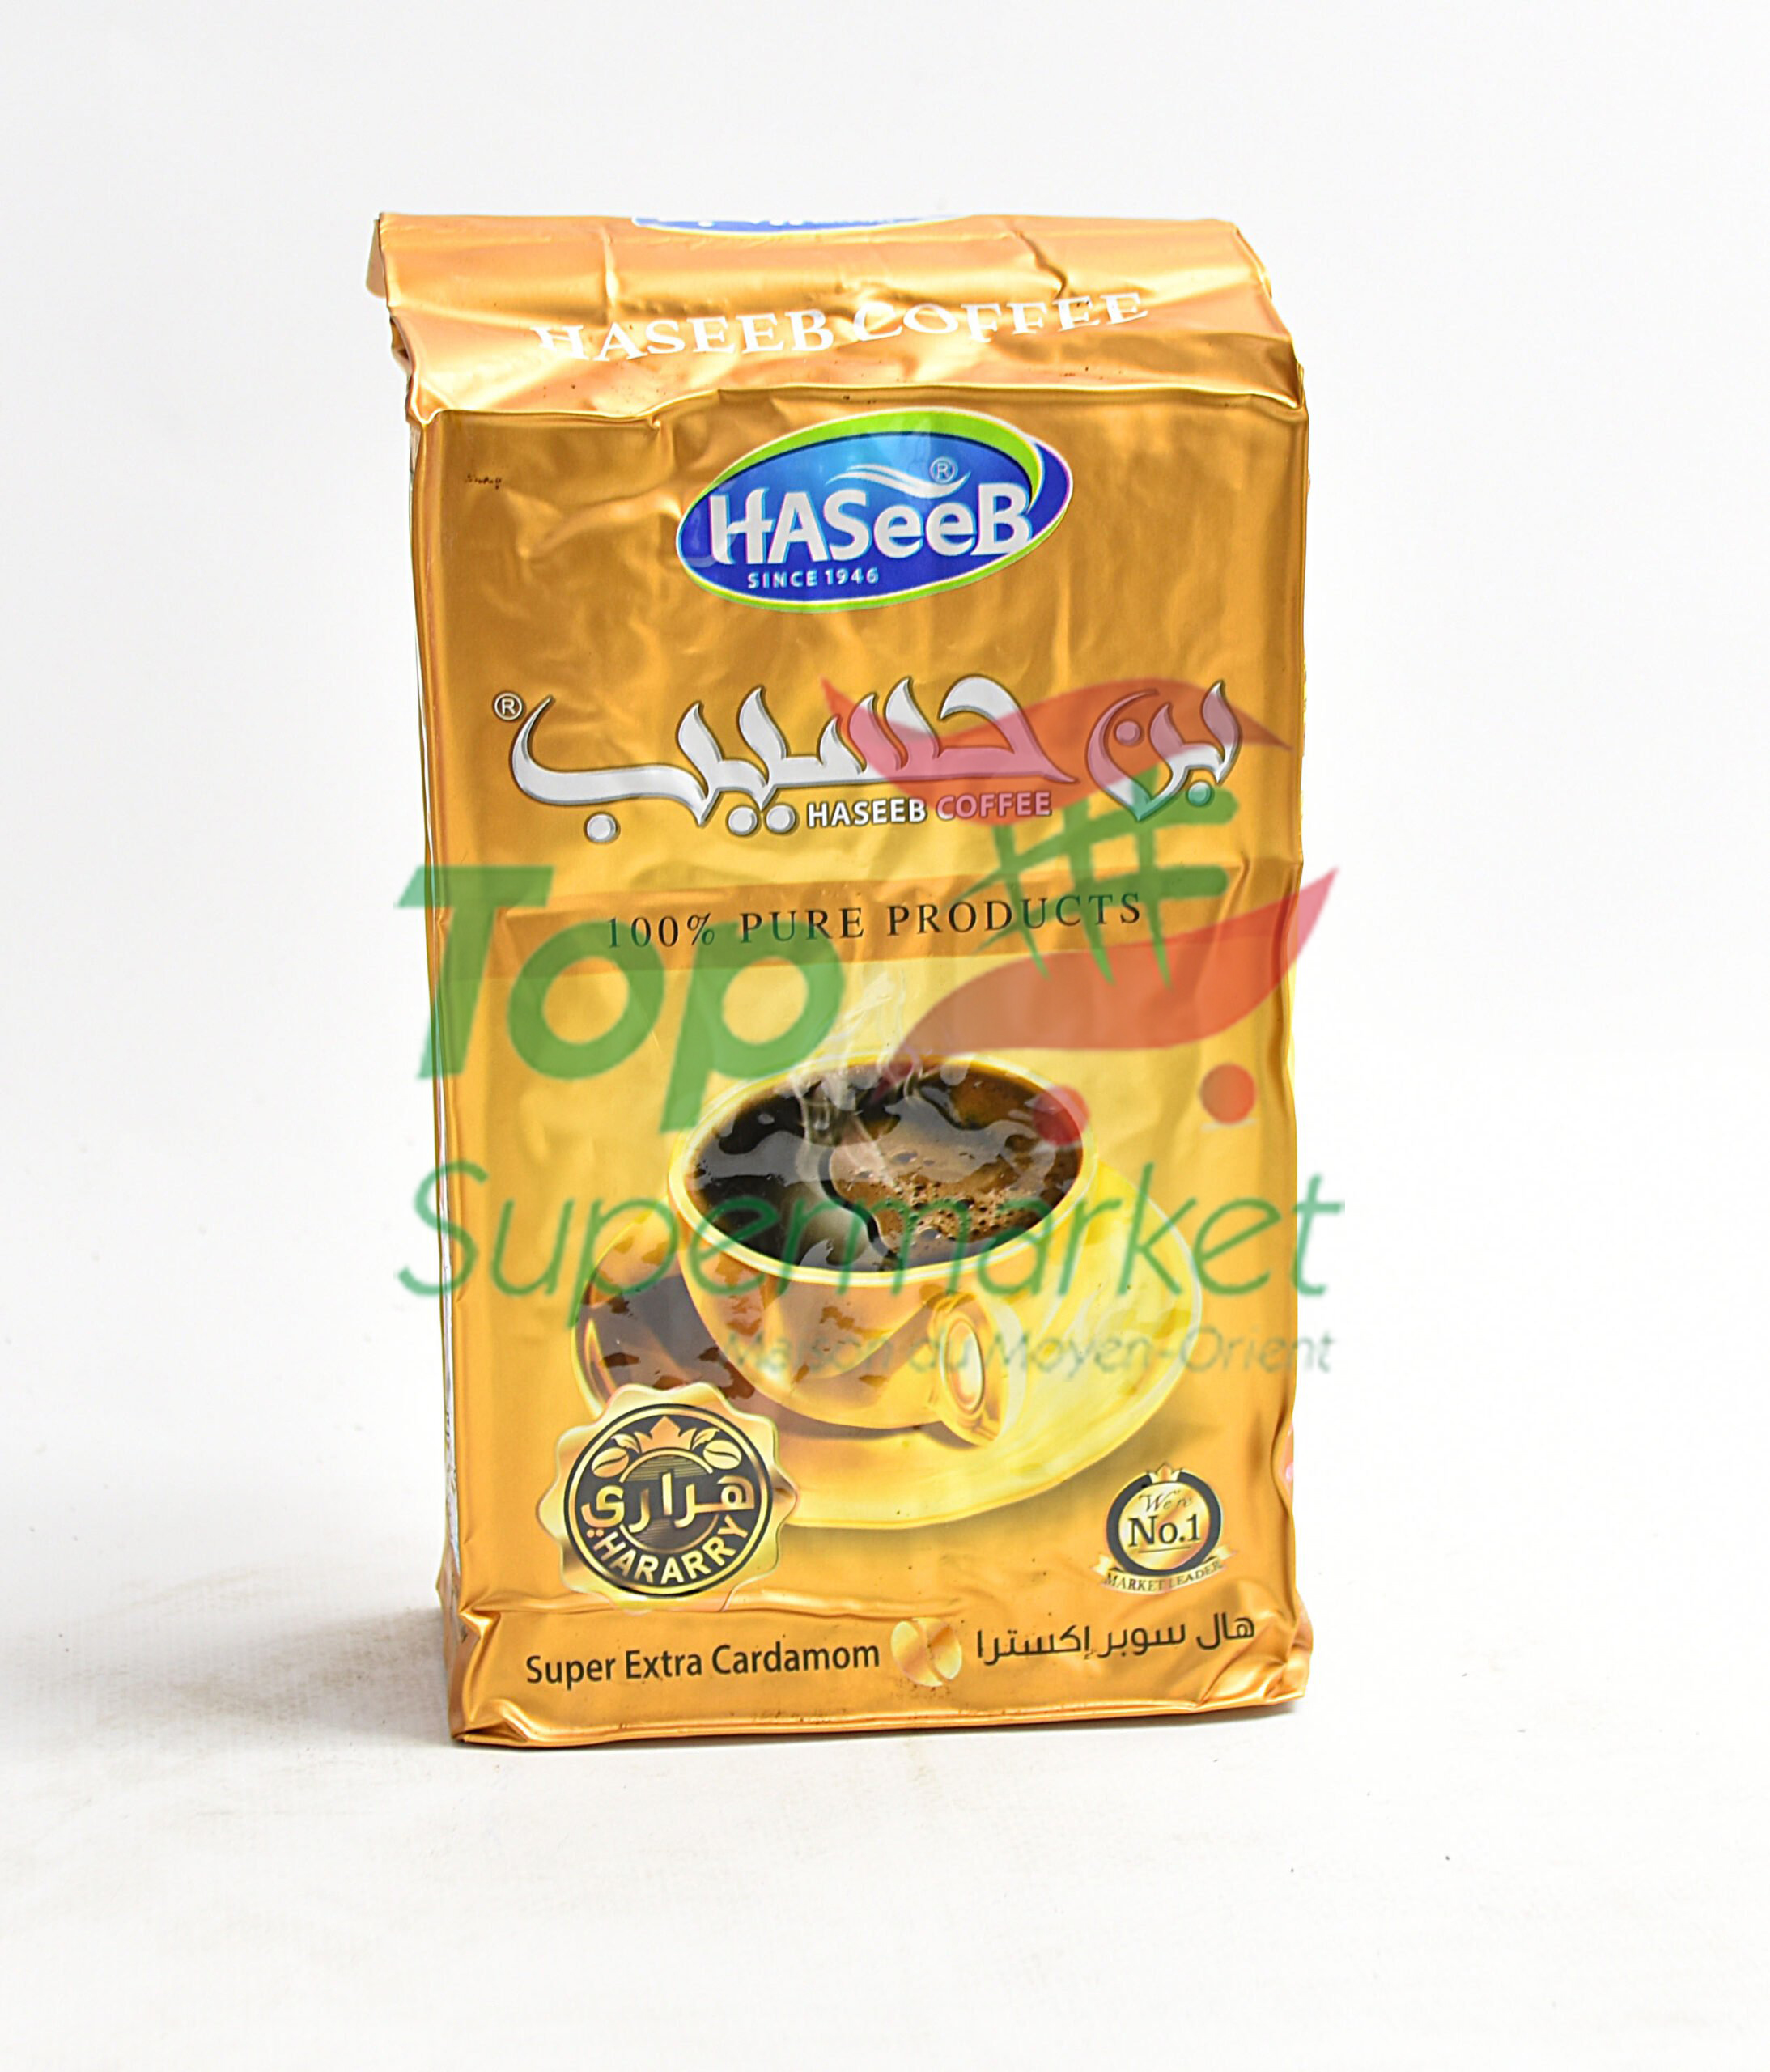 Haseeb Cafe Gold 200g